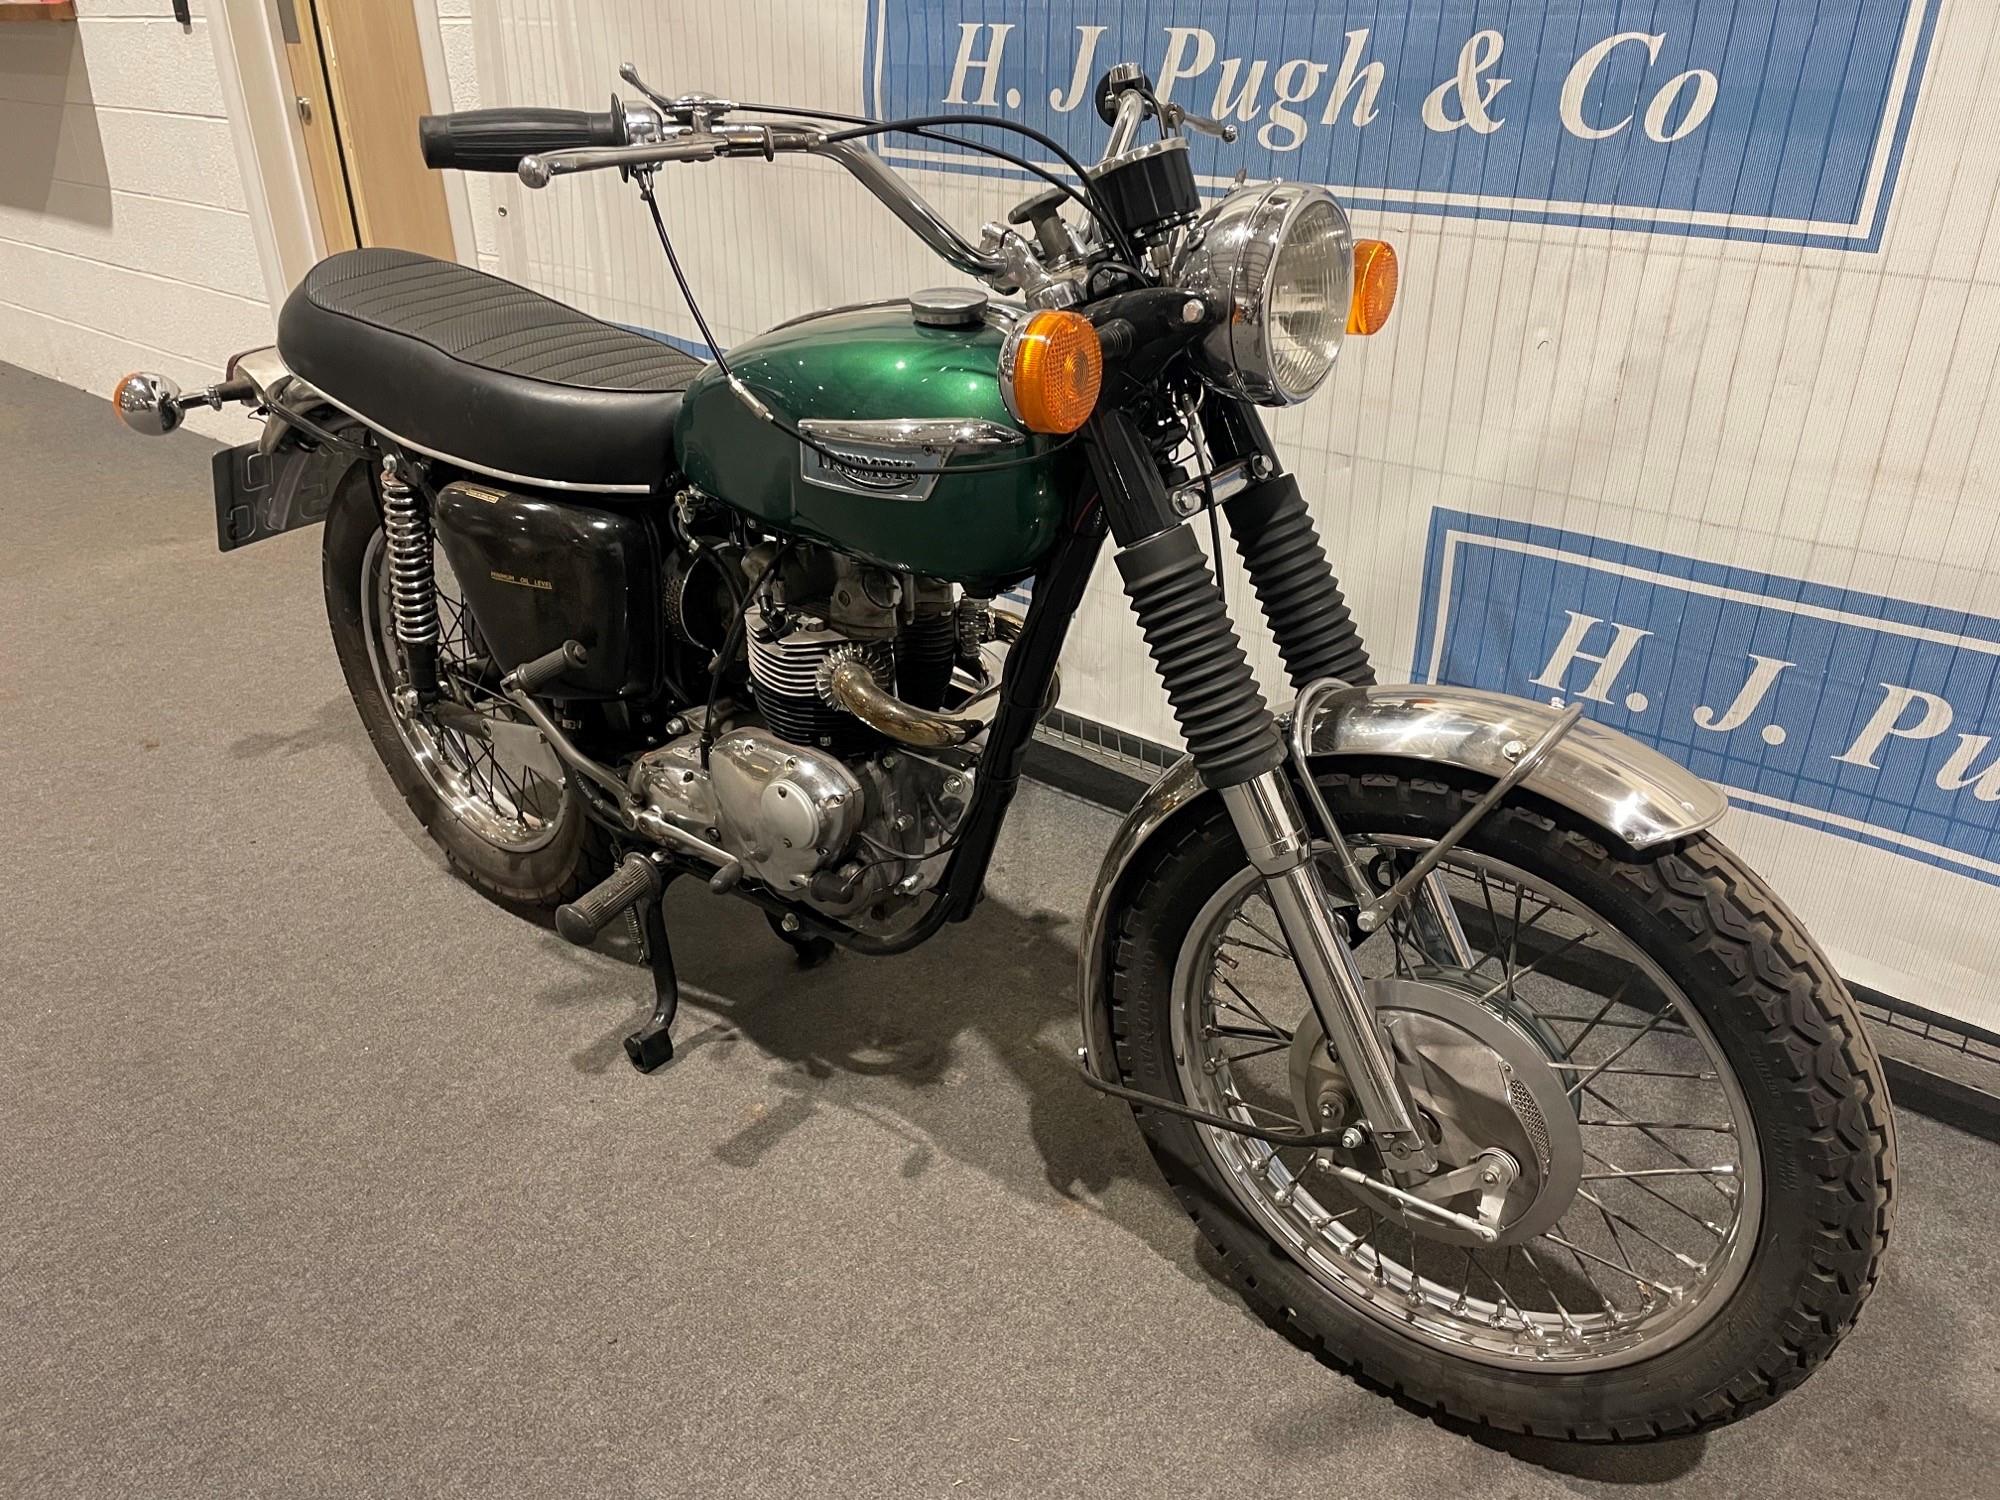 Triumph T100C motorcycle. 1969. Full working order. Originally exported to Johnson Motors, - Image 4 of 8